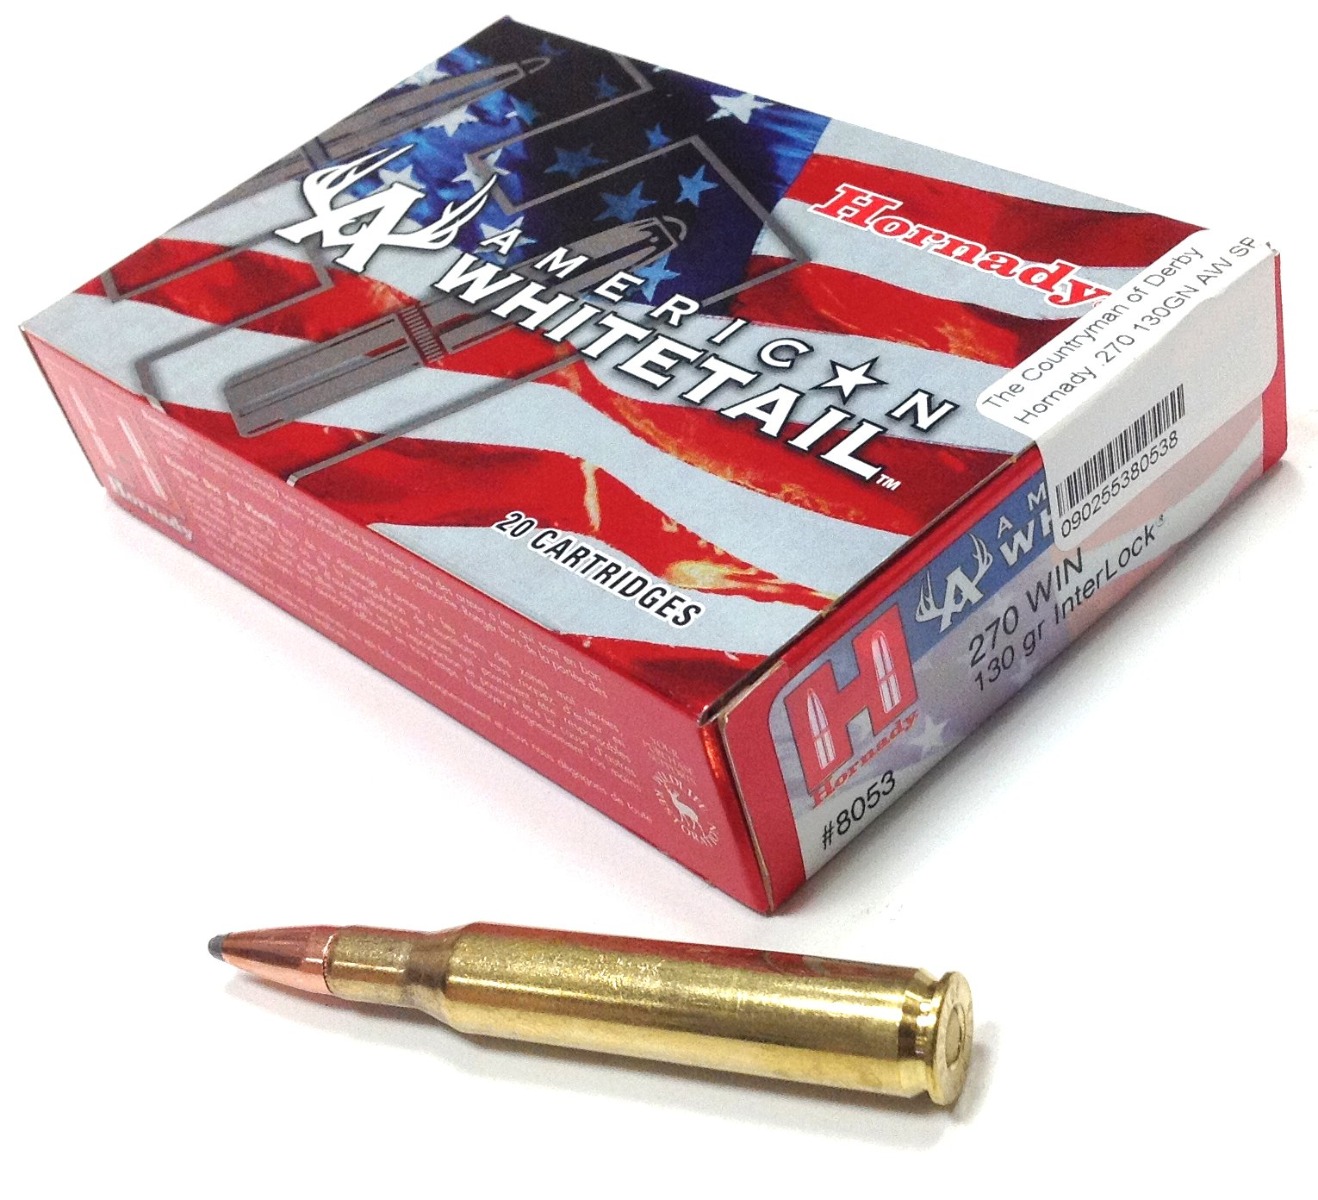 Hornady .270 Win 130gr American Whitetail Soft Point SP Ammunition 8053